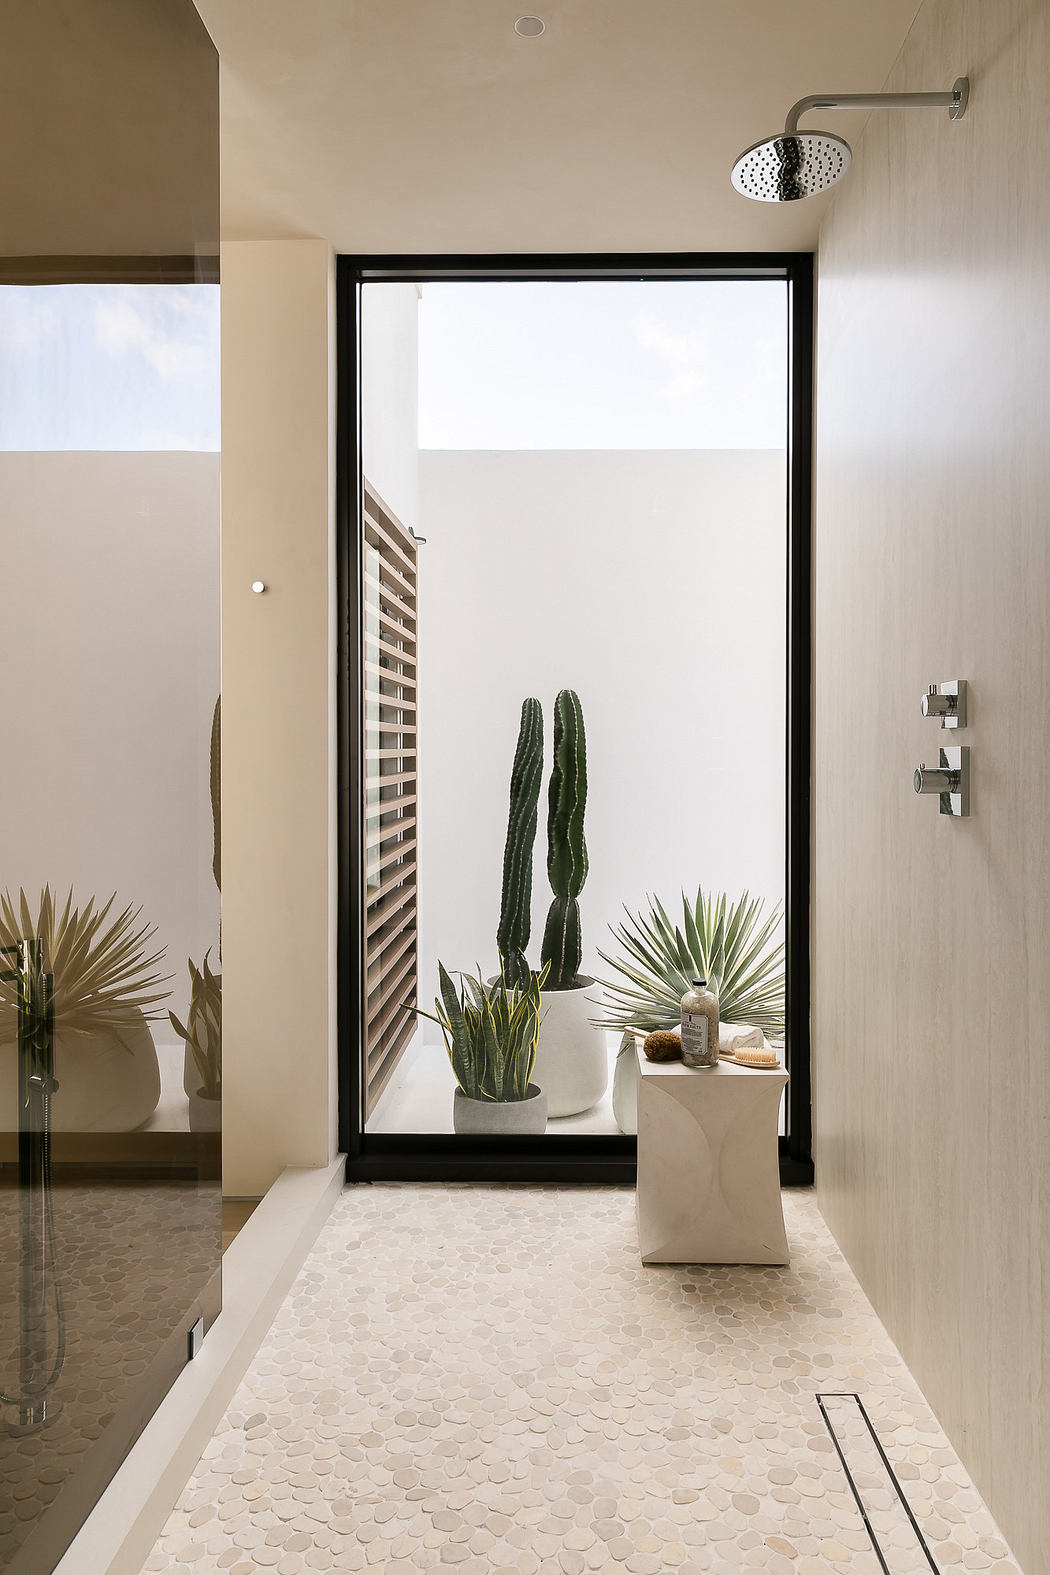 Modern bathroom with terrazzo flooring and cactus decor near a shower with glass door